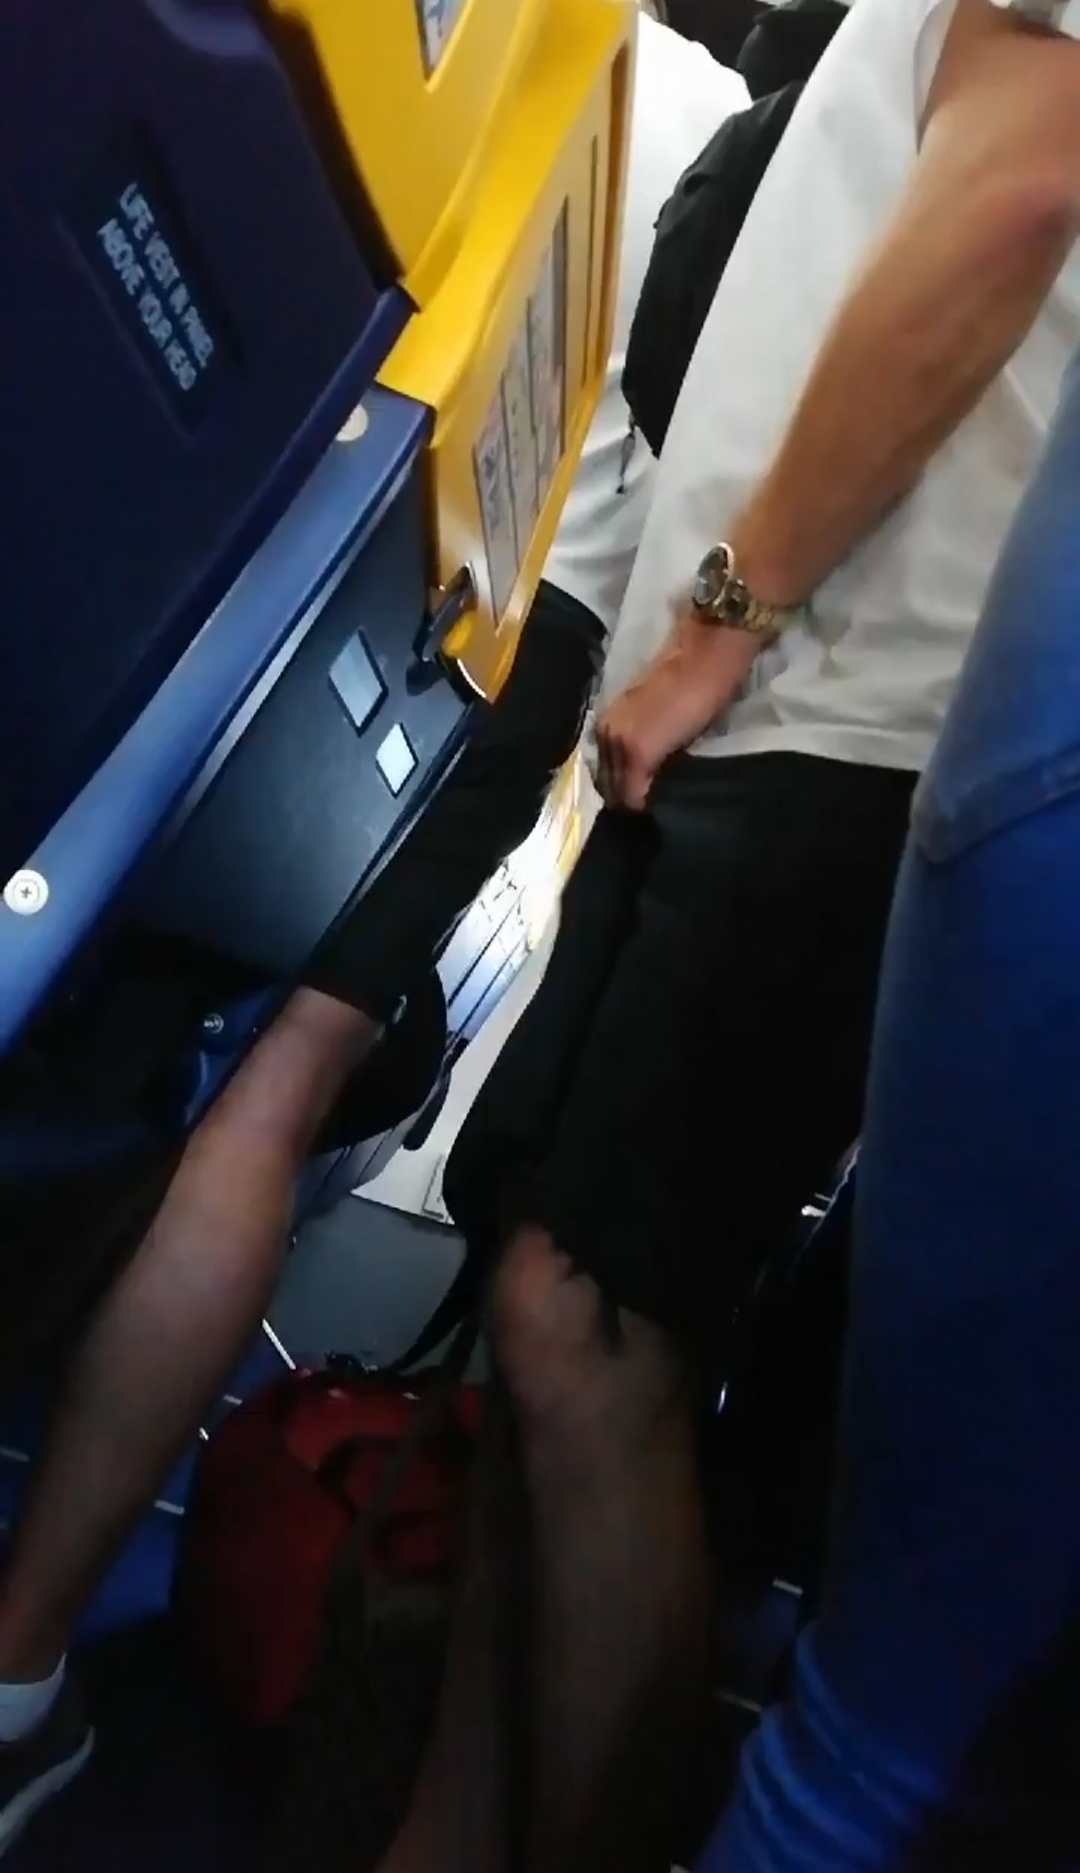 Desperate to piss on plane